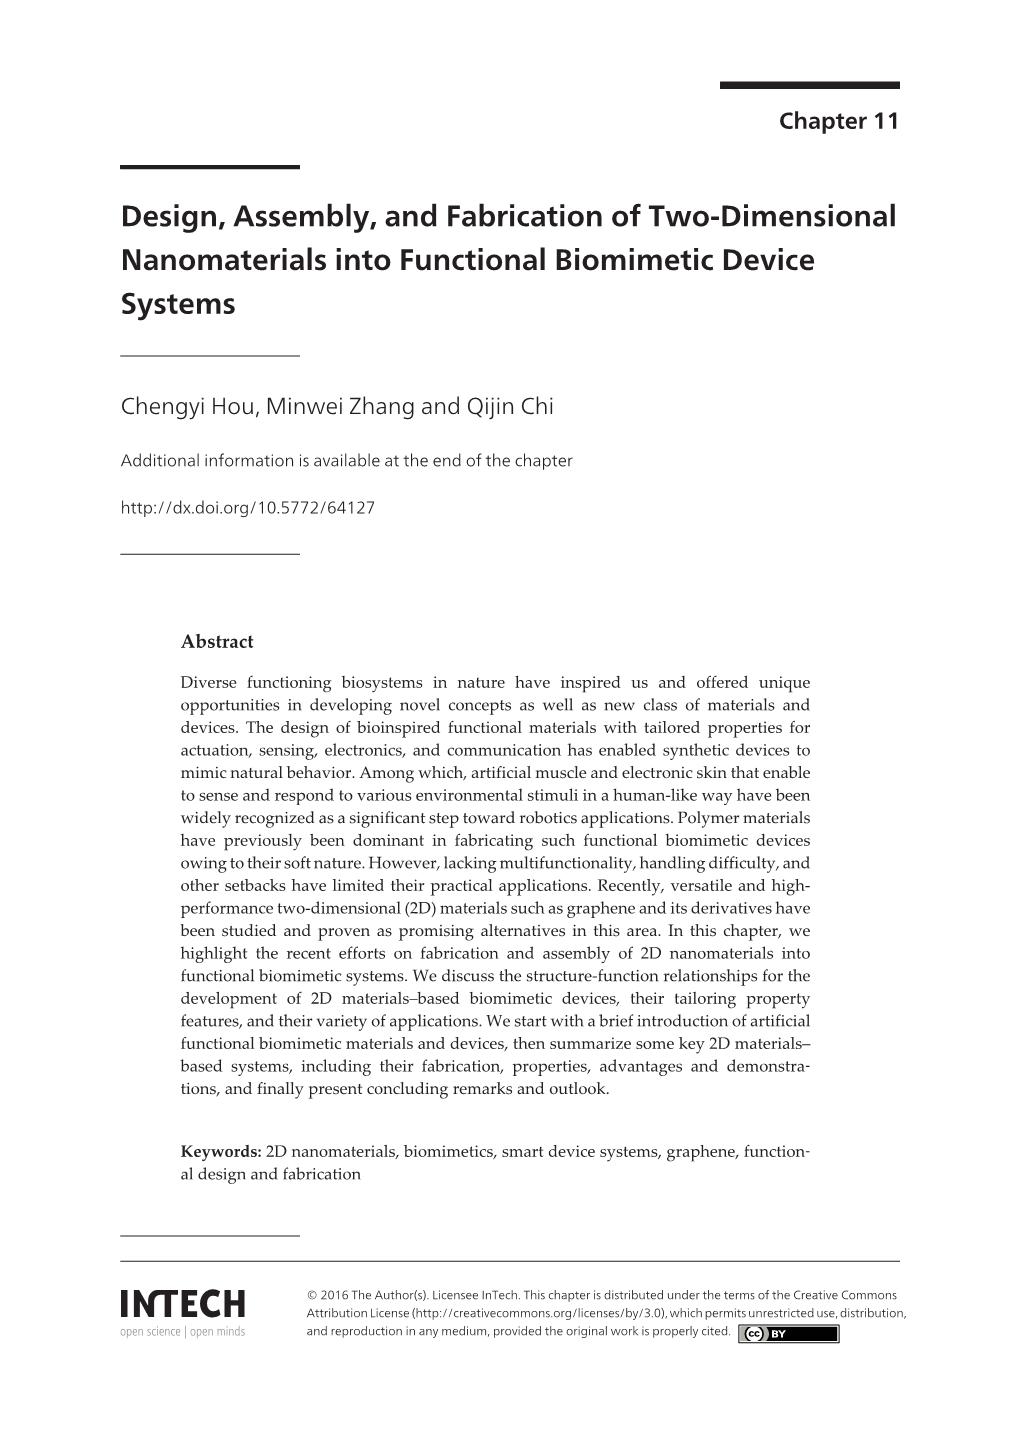 Design, Assembly, and Fabrication of Two-Dimensional Nanomaterials Into Functional Biomimetic Device Systems